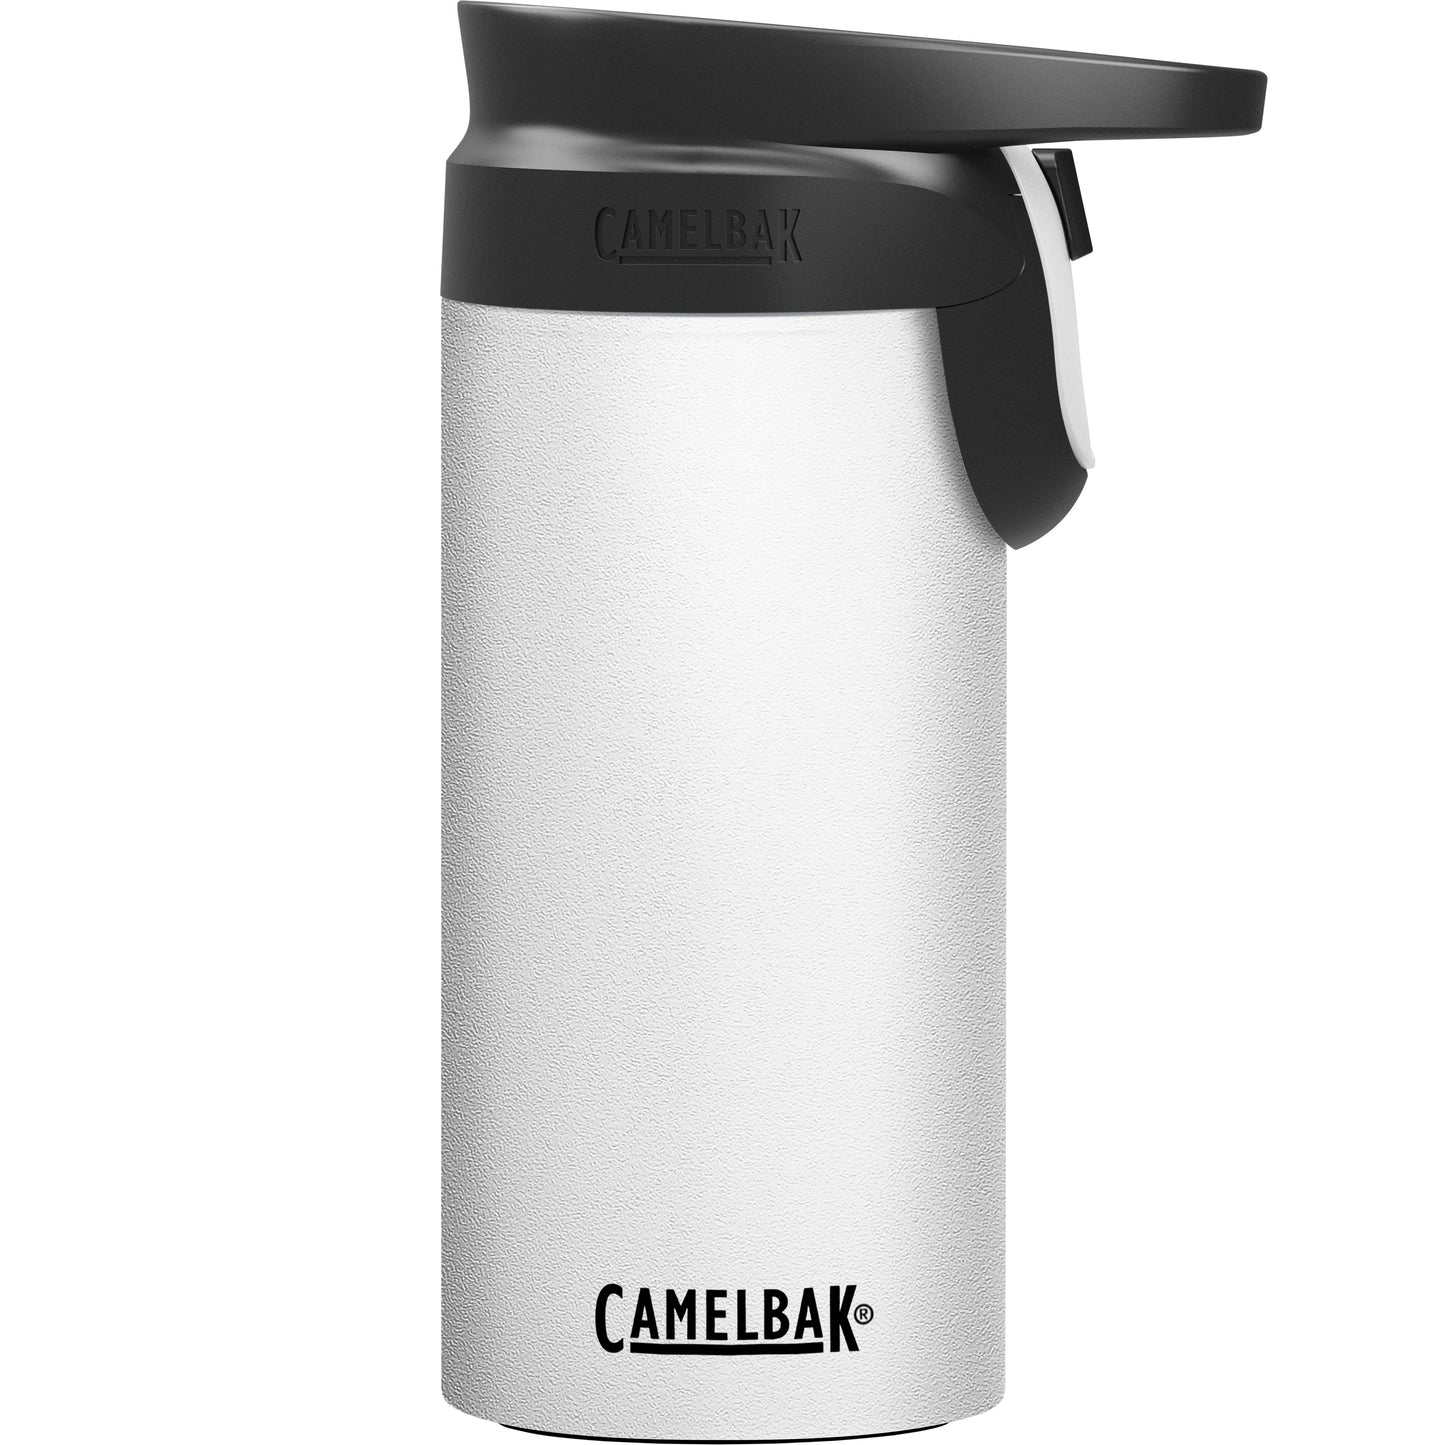 CAMELBAK FORGE FLOW SST VACUUM INSULATED